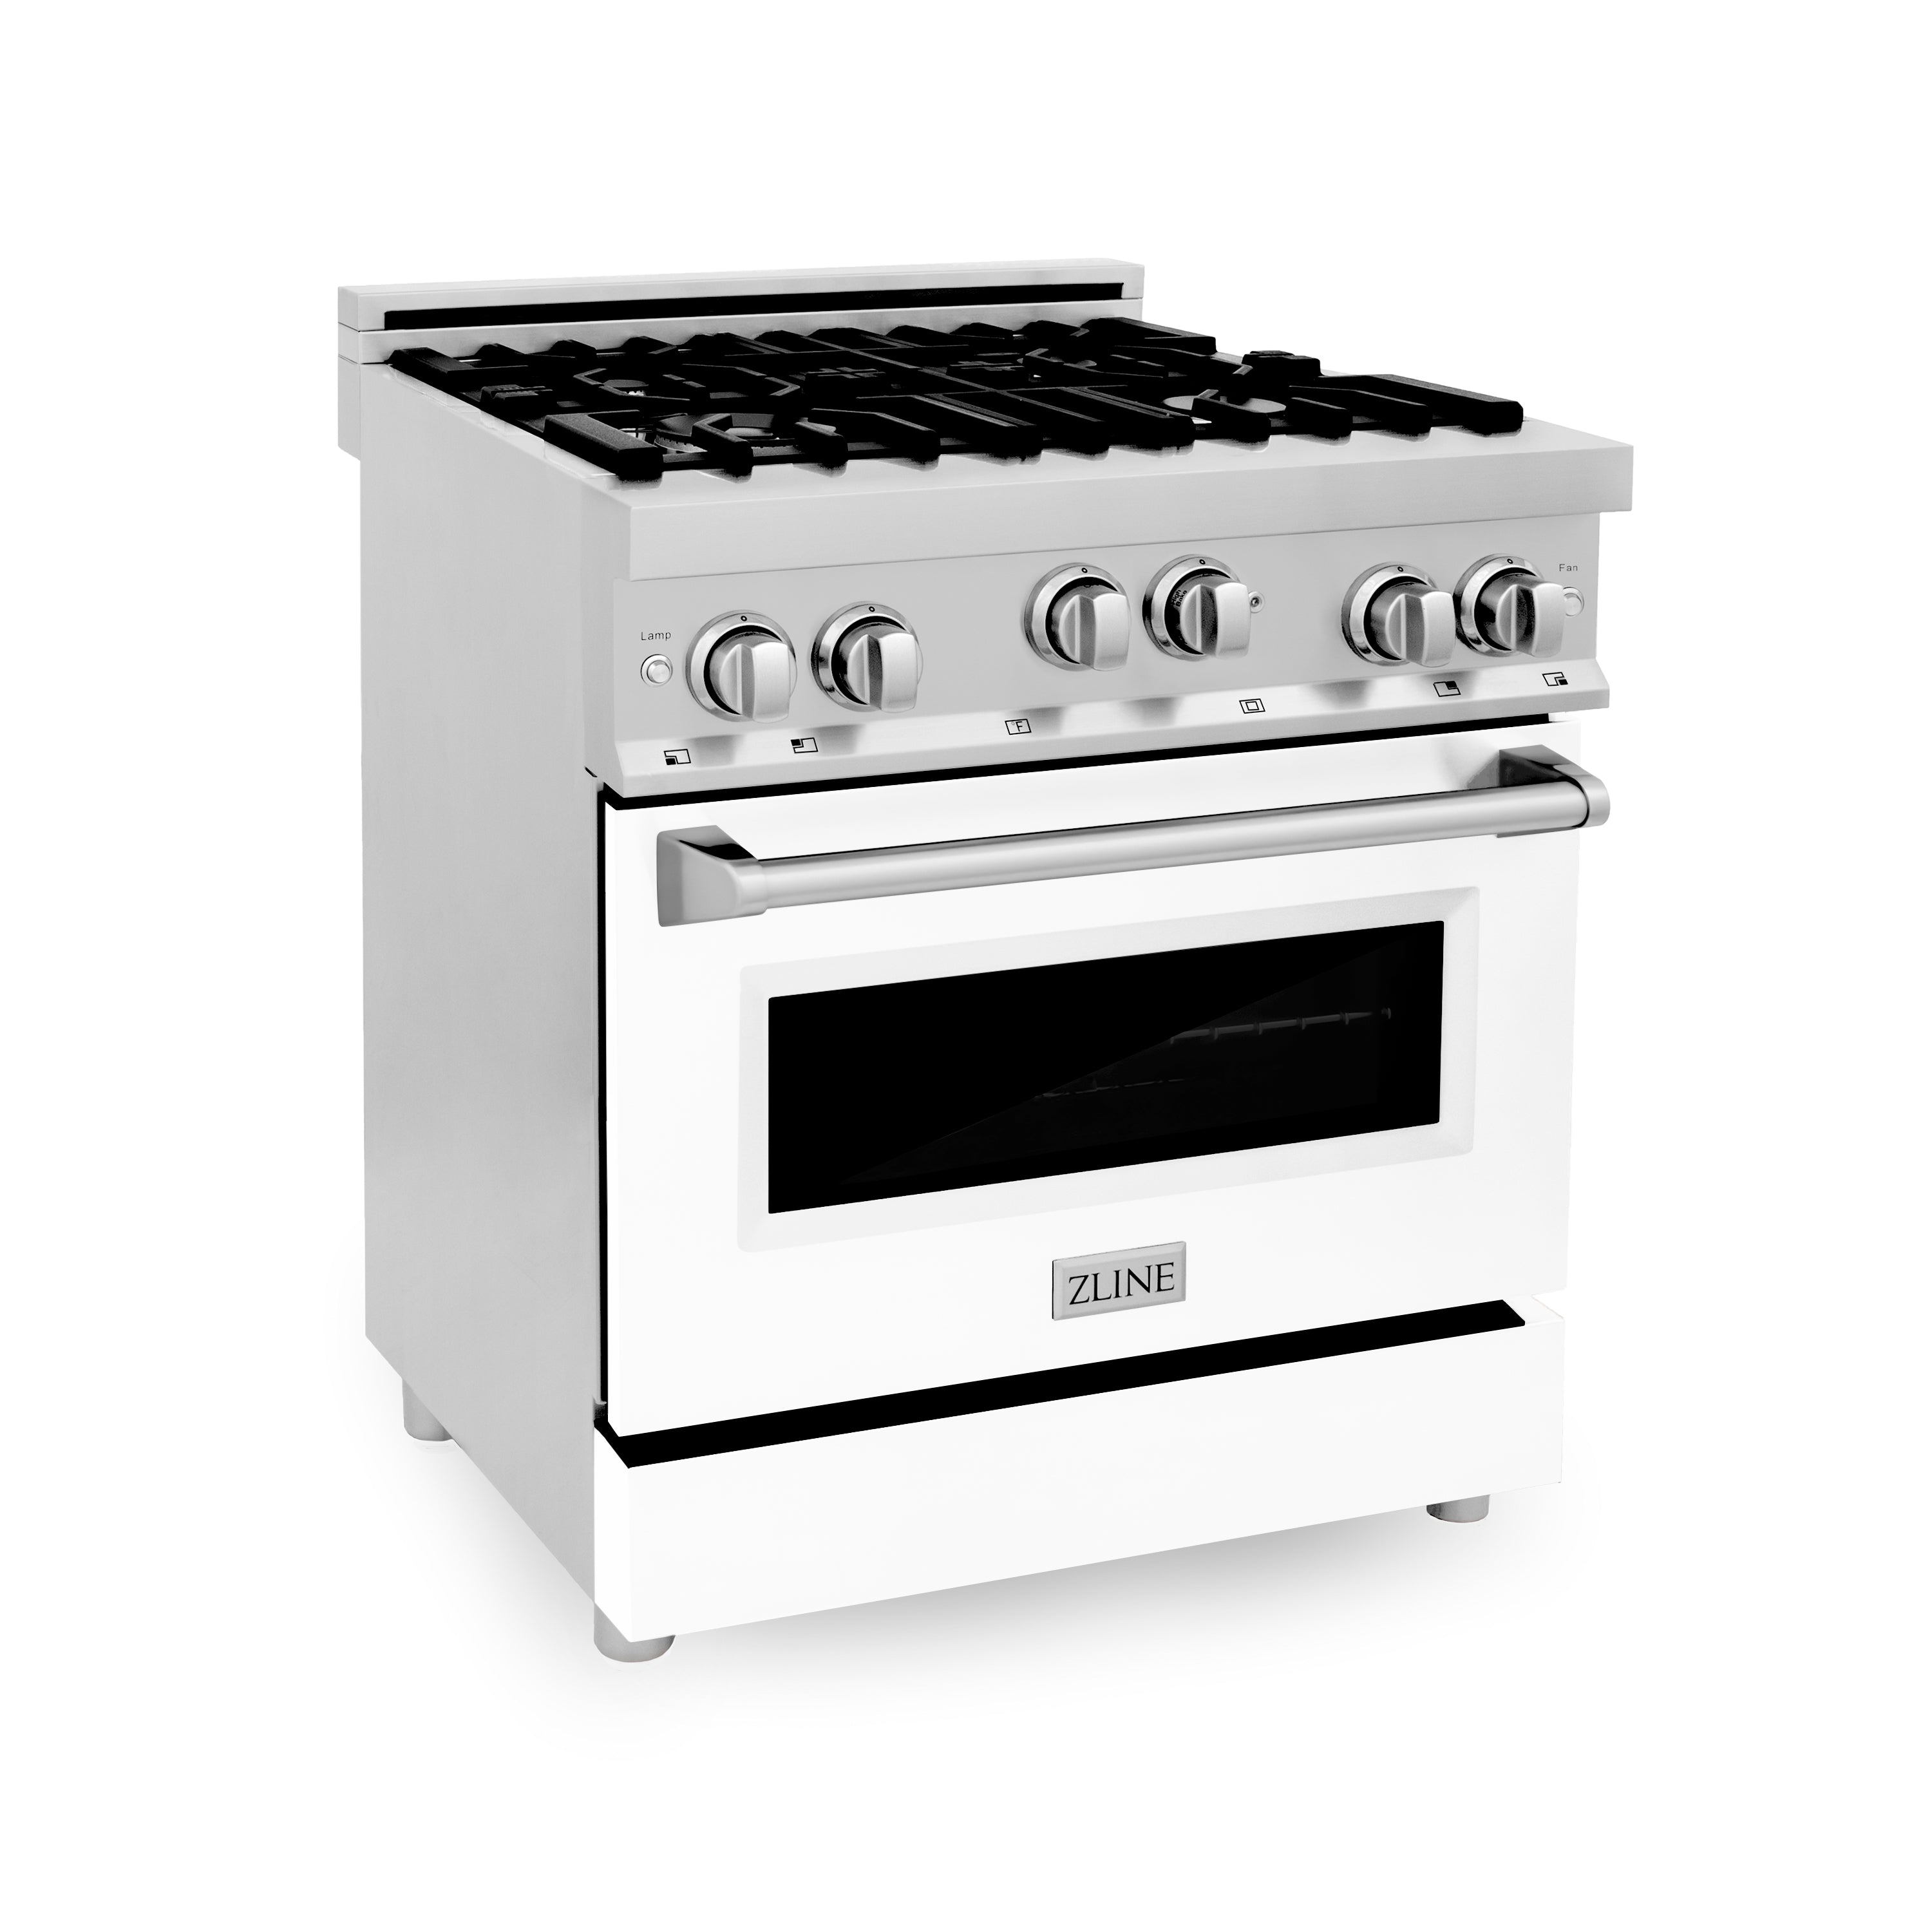 ZLINE 30 in. 4.0 cu. ft. Range with Gas Stove and Gas Oven in Stainless Steel with Color Door Options (RG30)